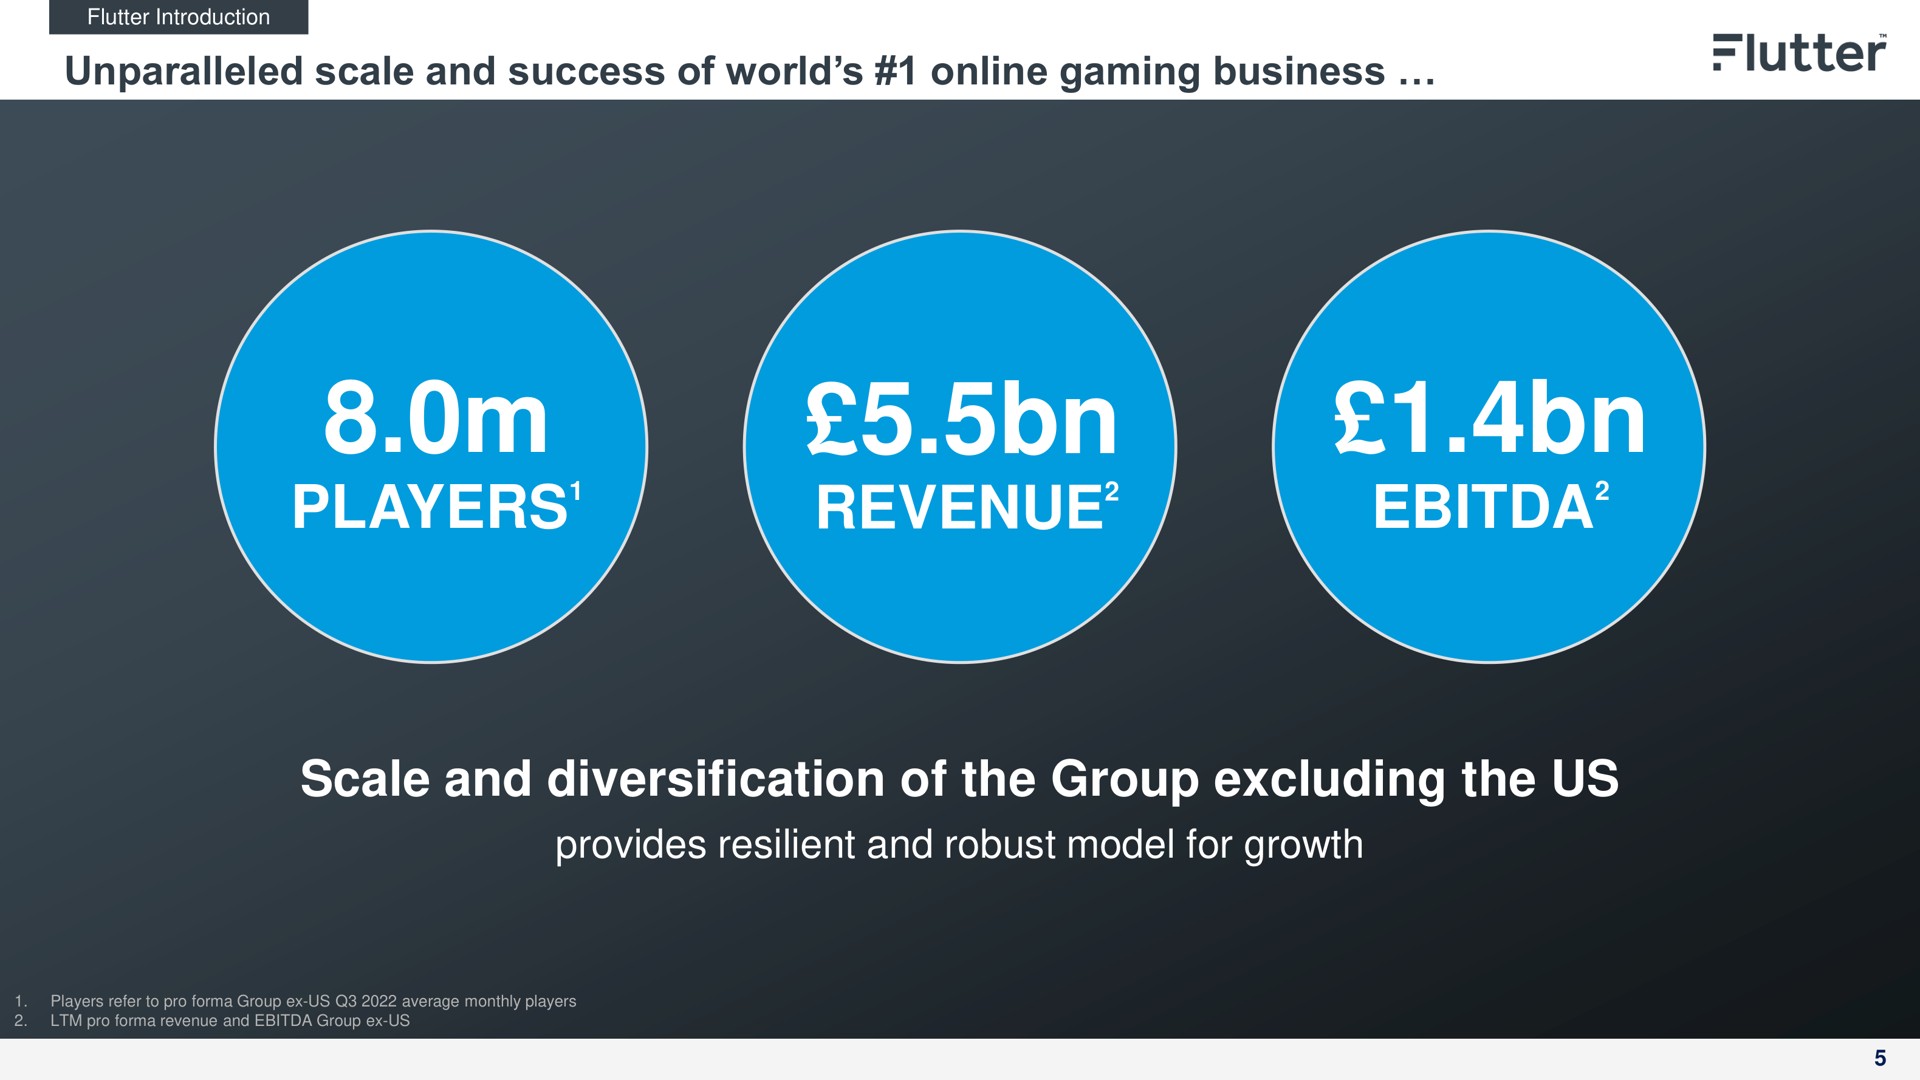 unparalleled scale and success of world gaming business players revenue scale and diversification of the group excluding the us provides resilient and robust model for growth sty | Flutter